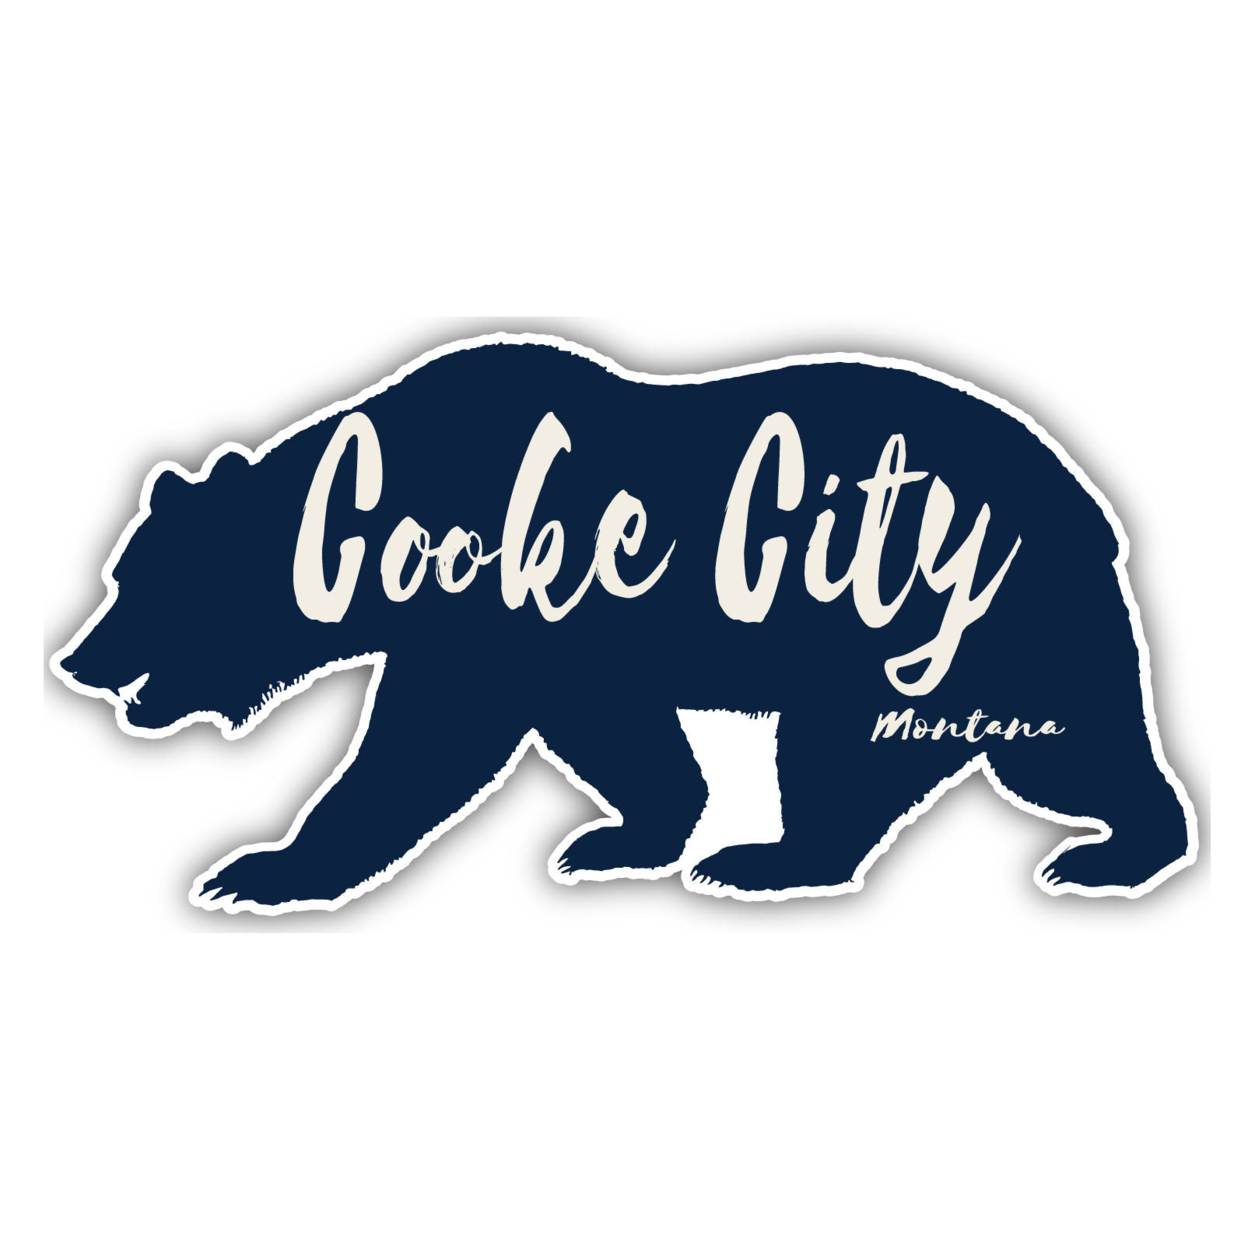 Cooke City Montana Souvenir Decorative Stickers (Choose Theme And Size) - 4-Pack, 12-Inch, Bear